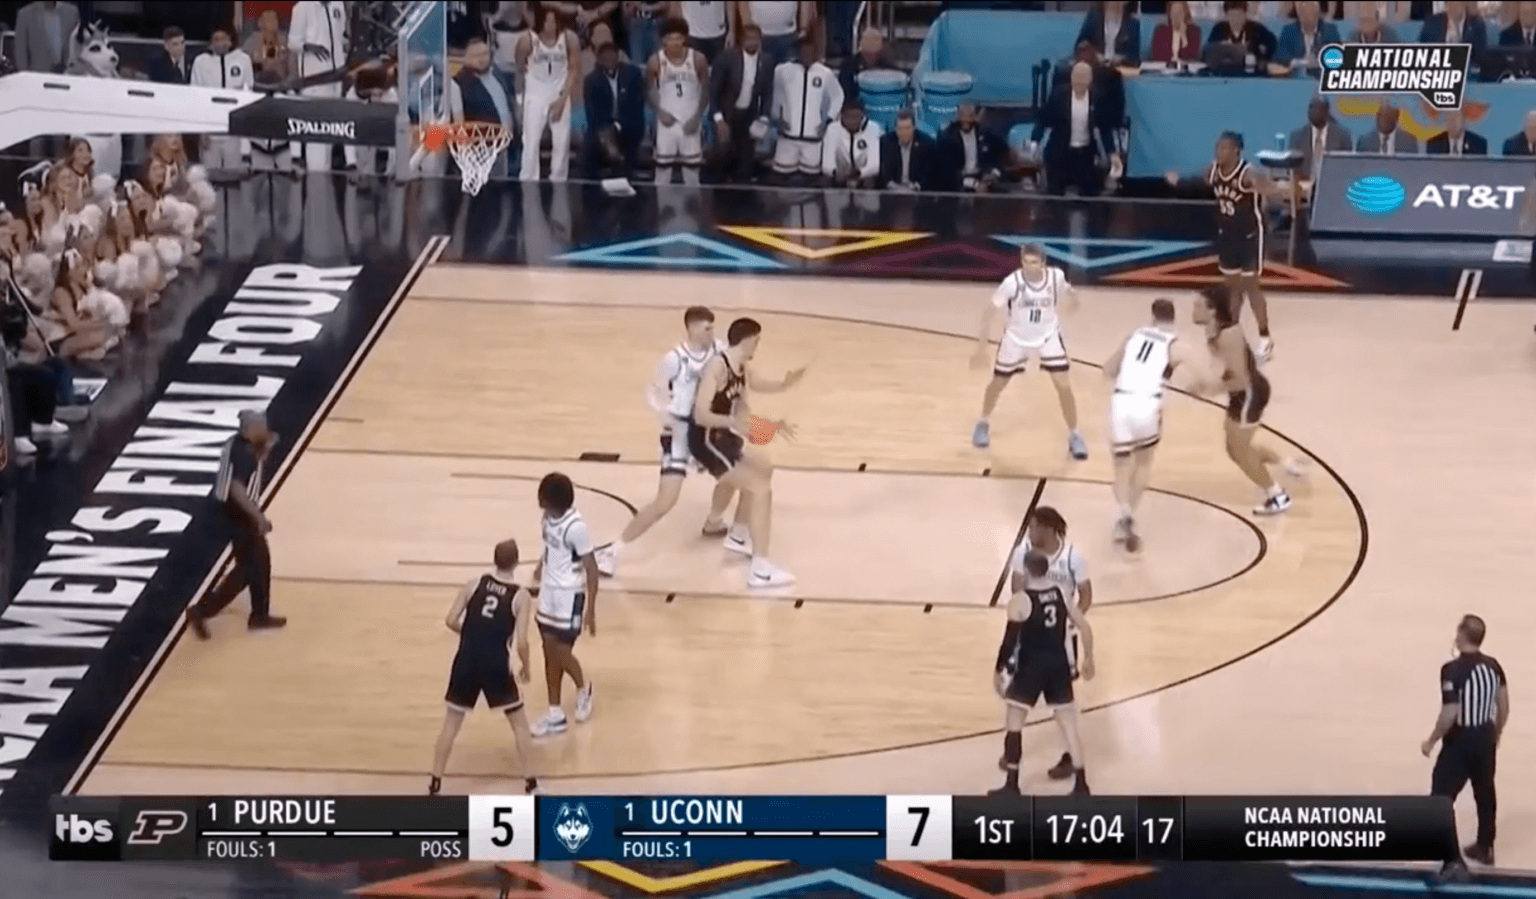 Inside the UConn protective procedure that halted Purdue and came out on top for a public championship